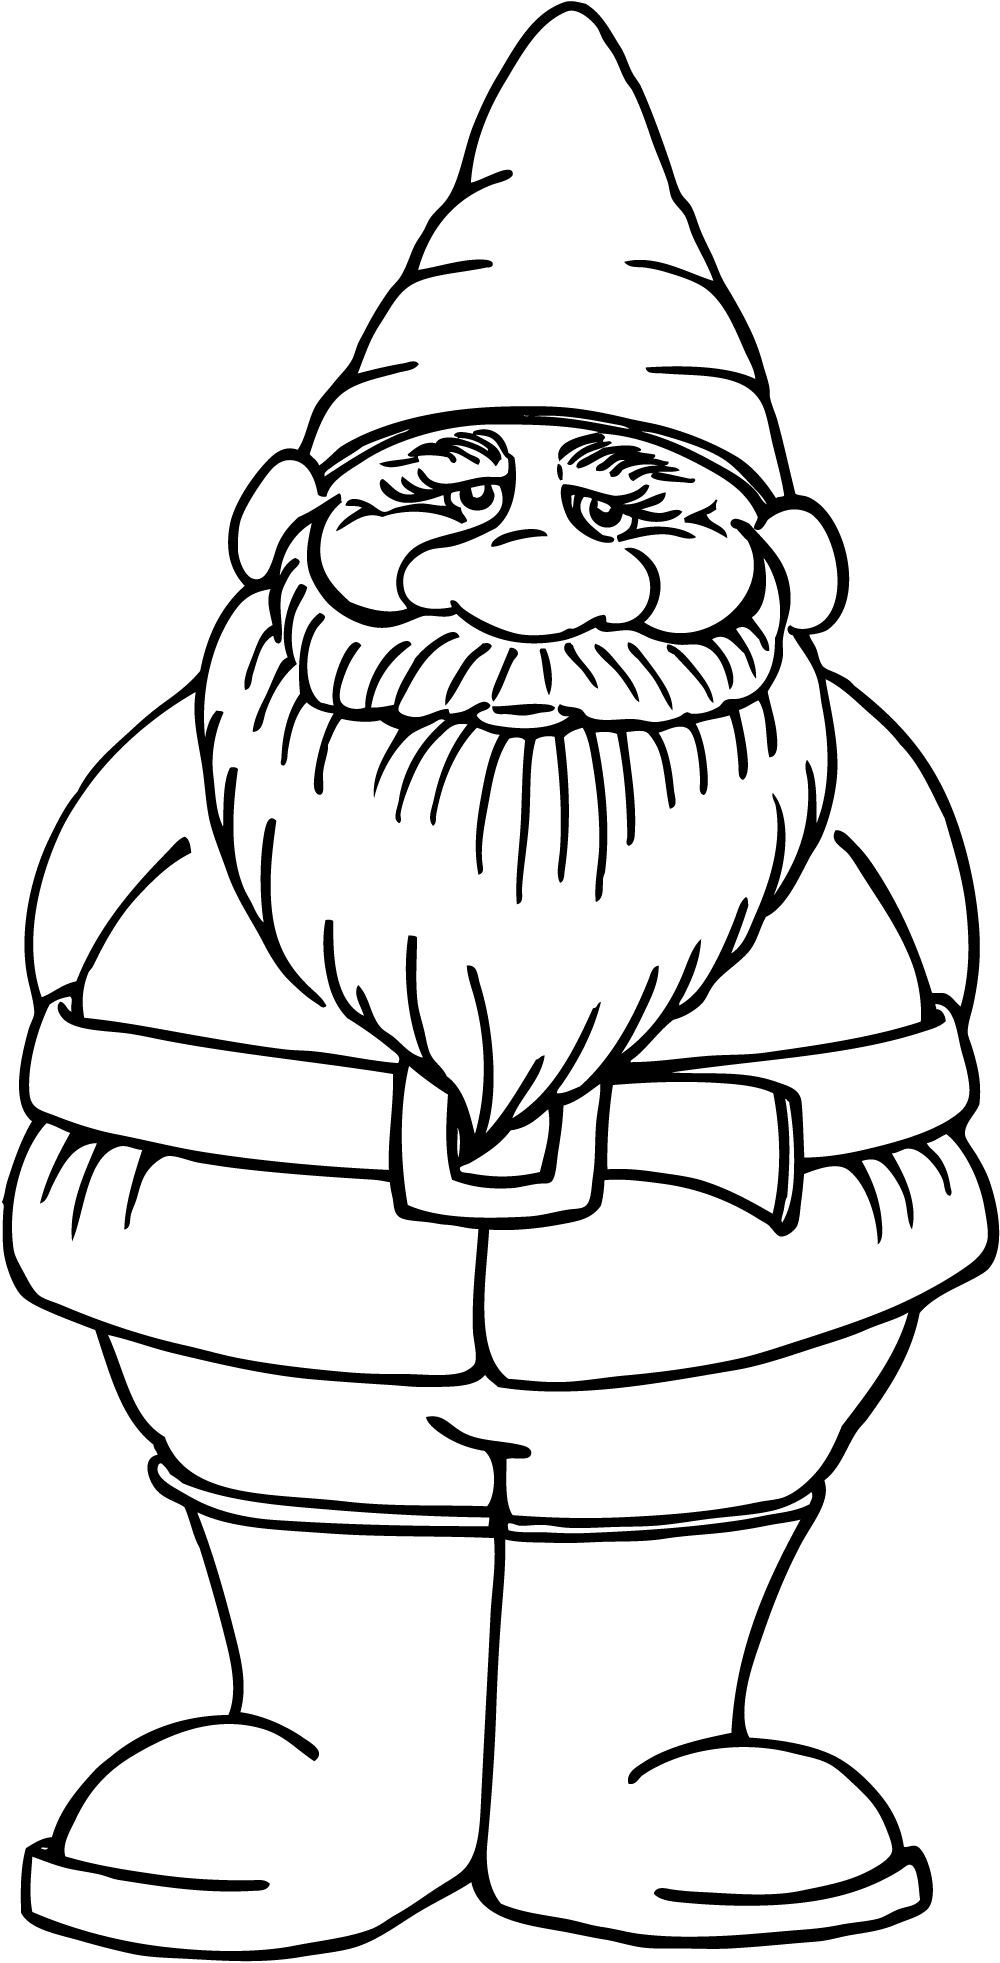 Gnome Coloring Pages Printable at GetDrawings | Free download